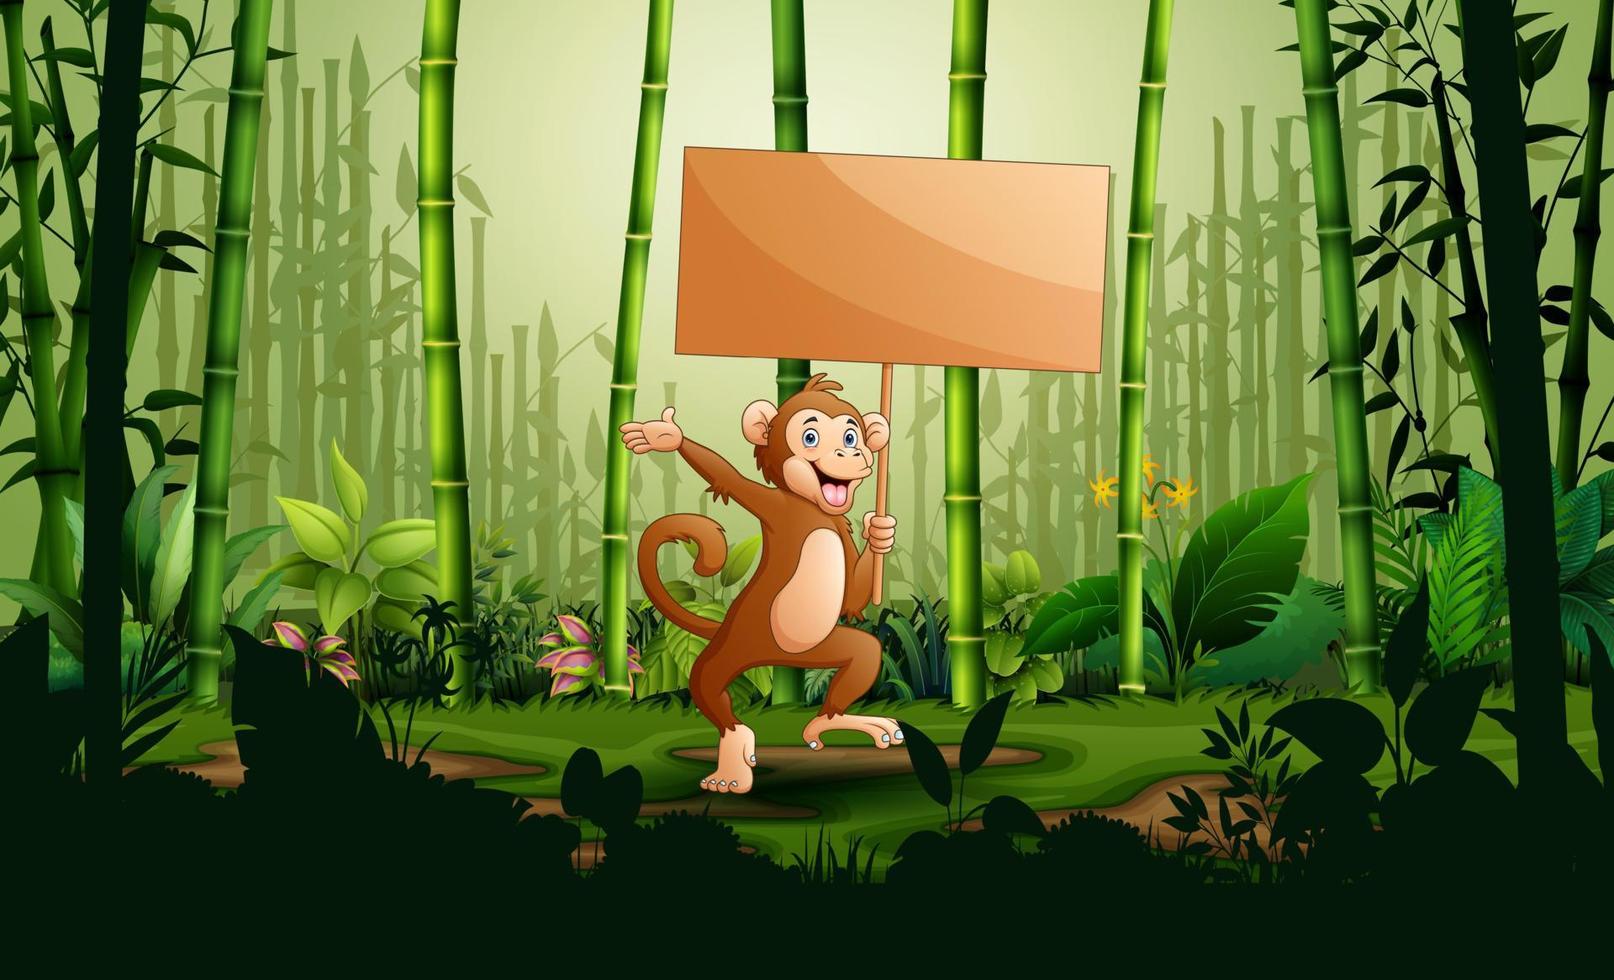 Cartoon a monkey holding wooden sign in the bamboo forest landscape vector